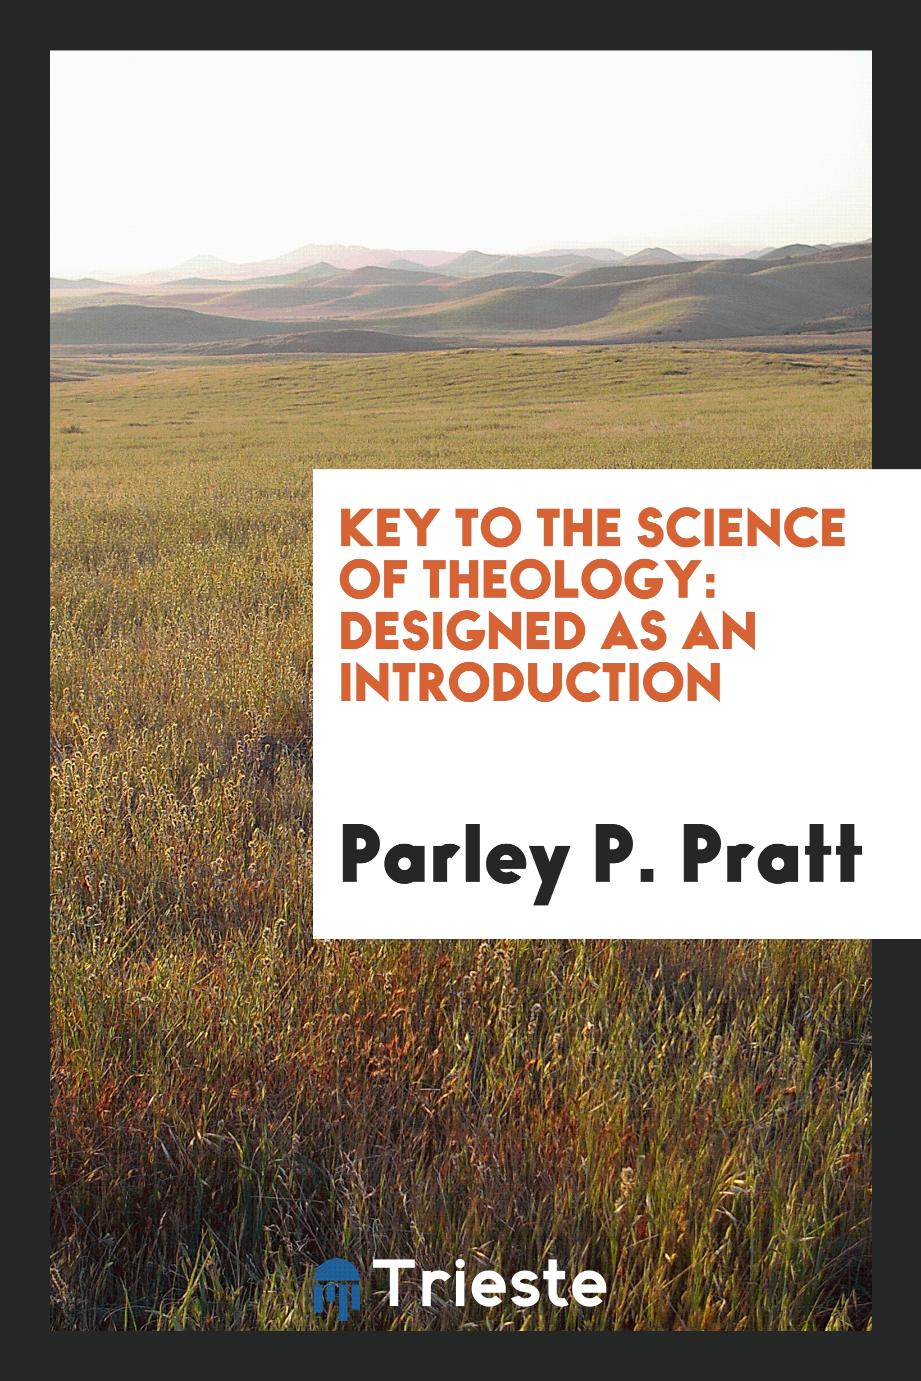 Key to the Science of Theology: Designed as an Introduction